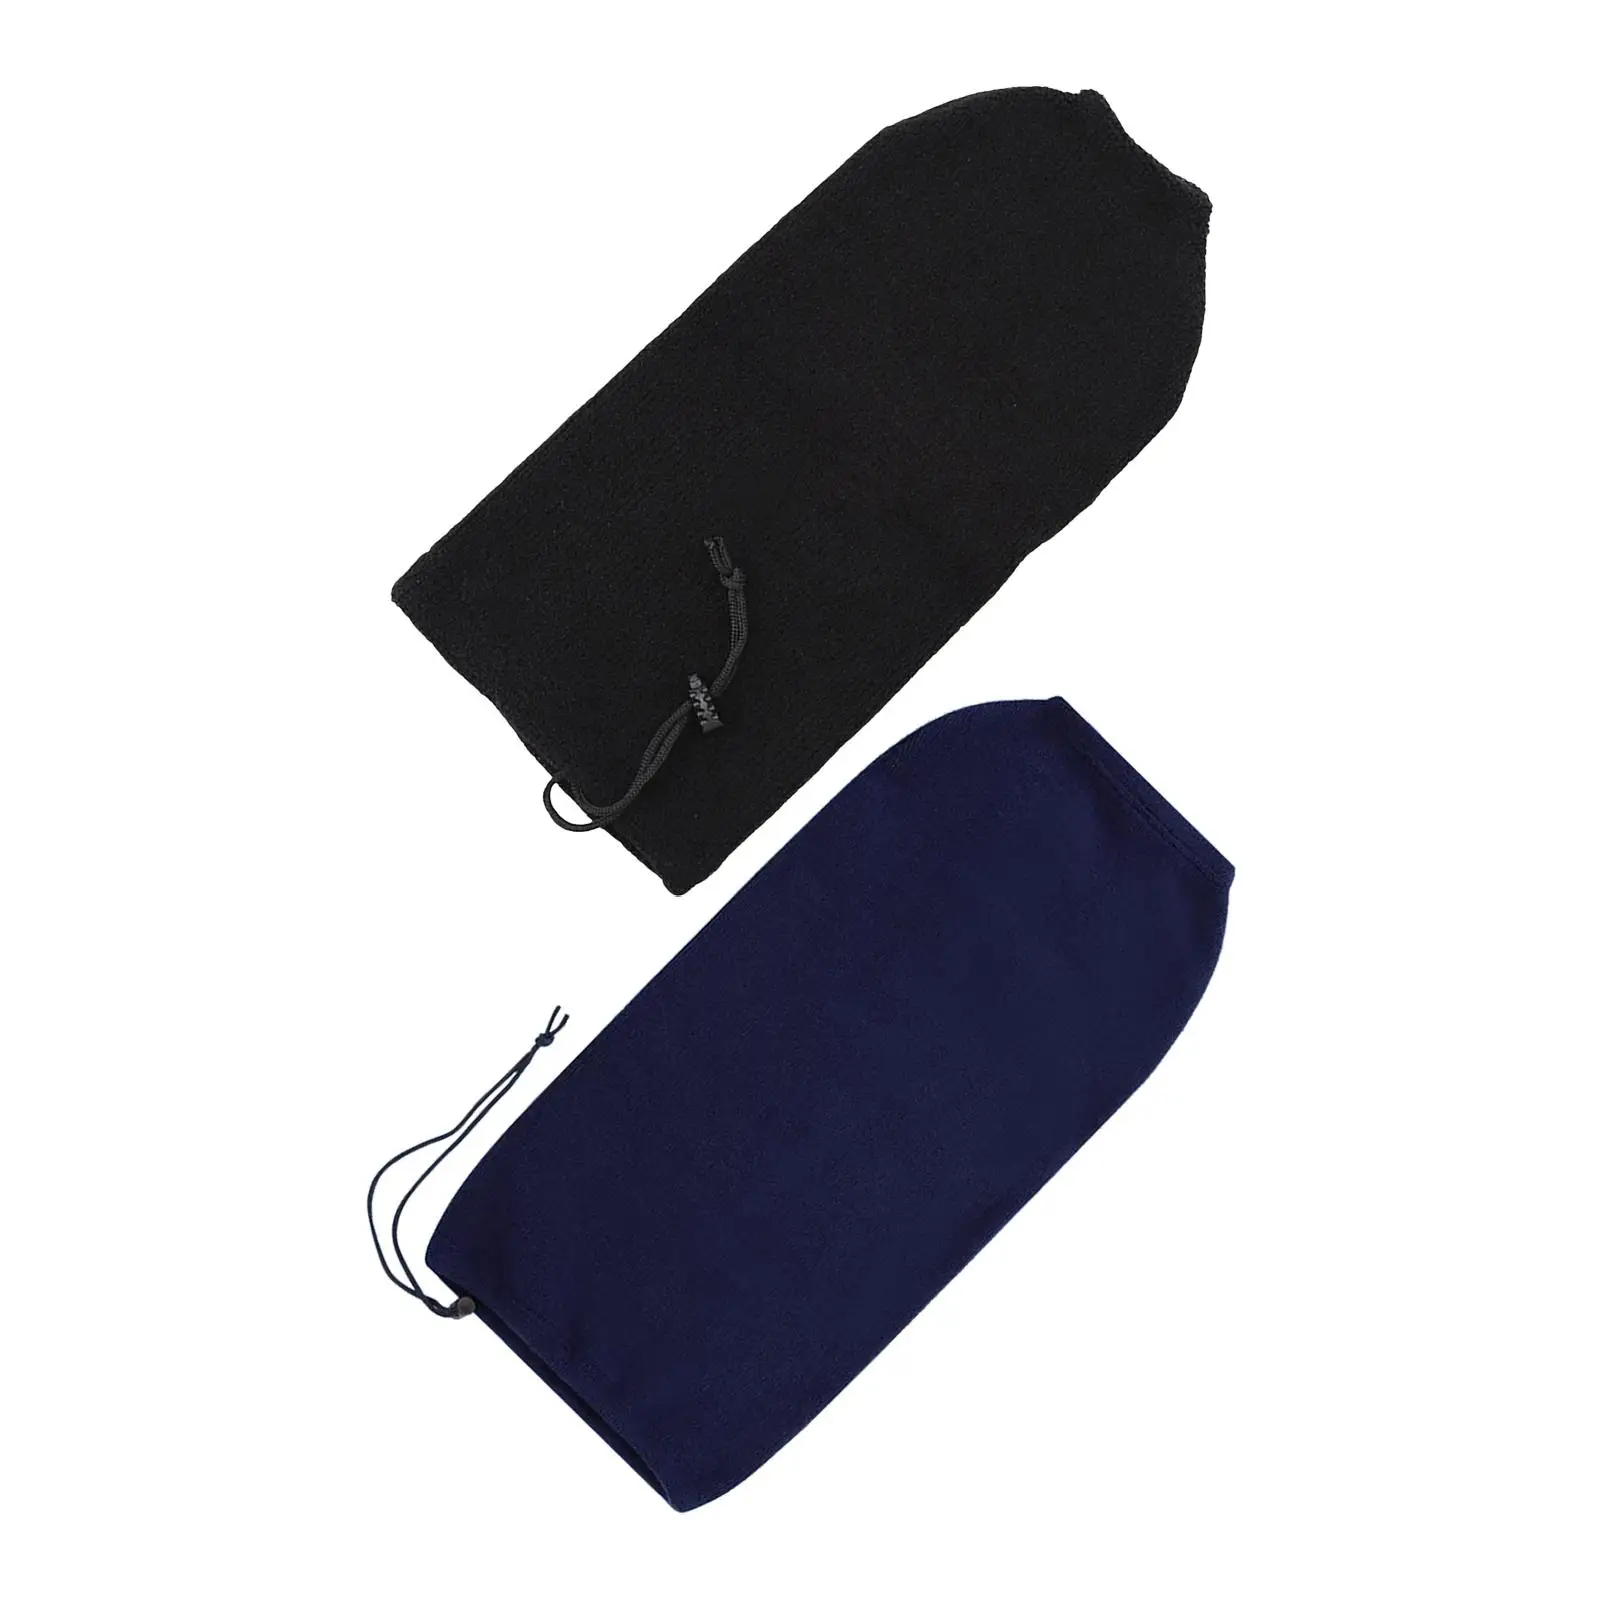 Boat Fender Cover with Tighten Drawstring Easy to Use 15.75inchx38.58inch Durable Marine Bumper Cover for Marine Bumper